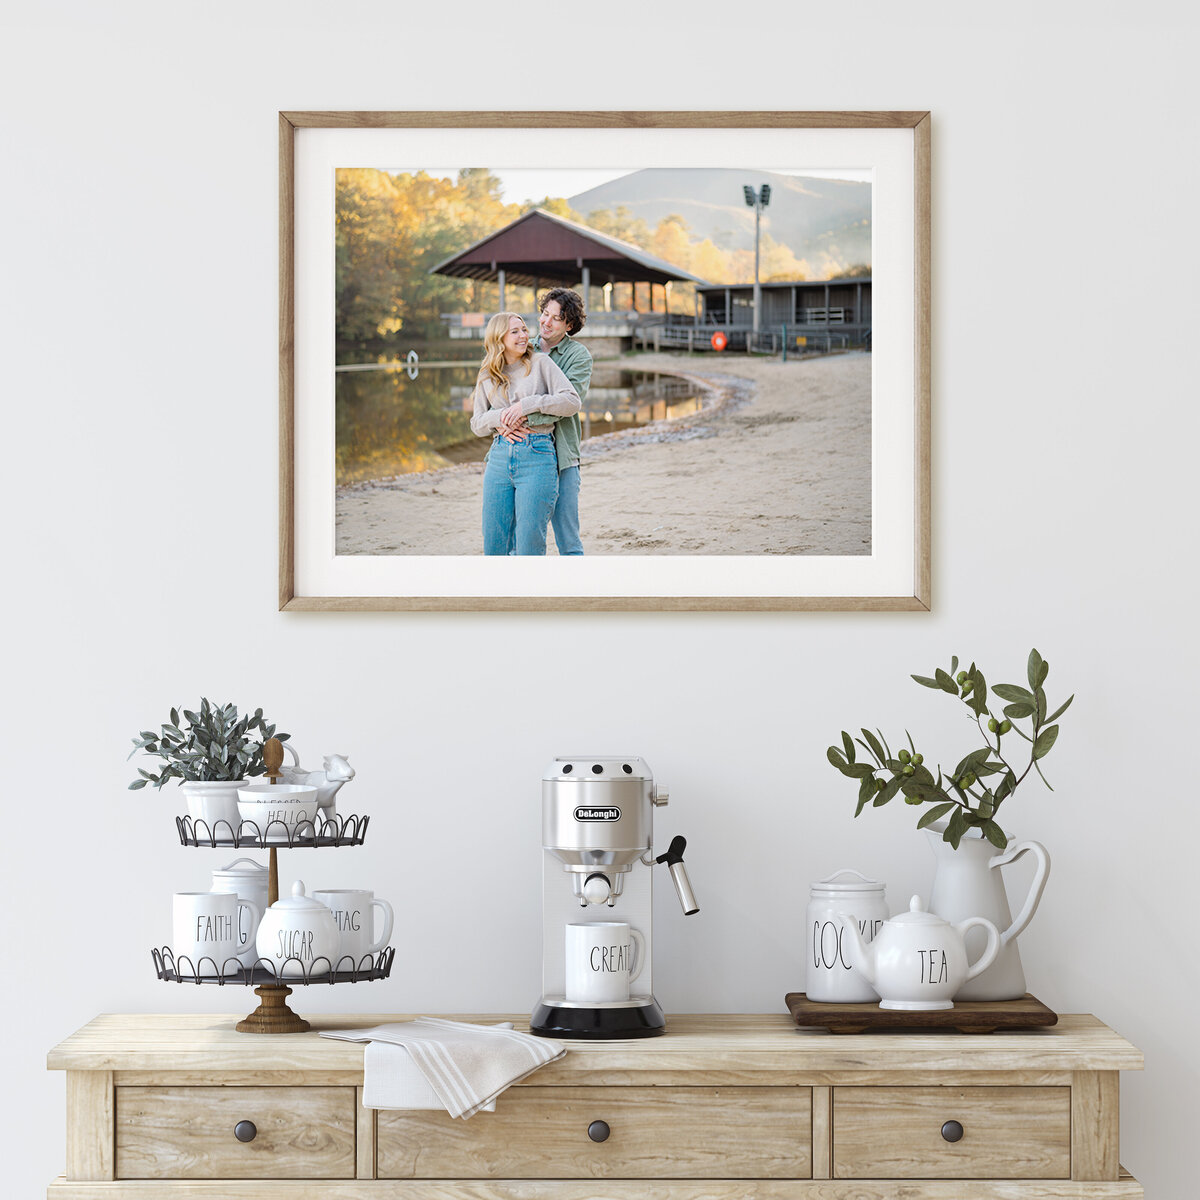 Framed artwork of an engagement photoshoot at Vogel State Park, by Amanda Touchstone, an Athens photographer